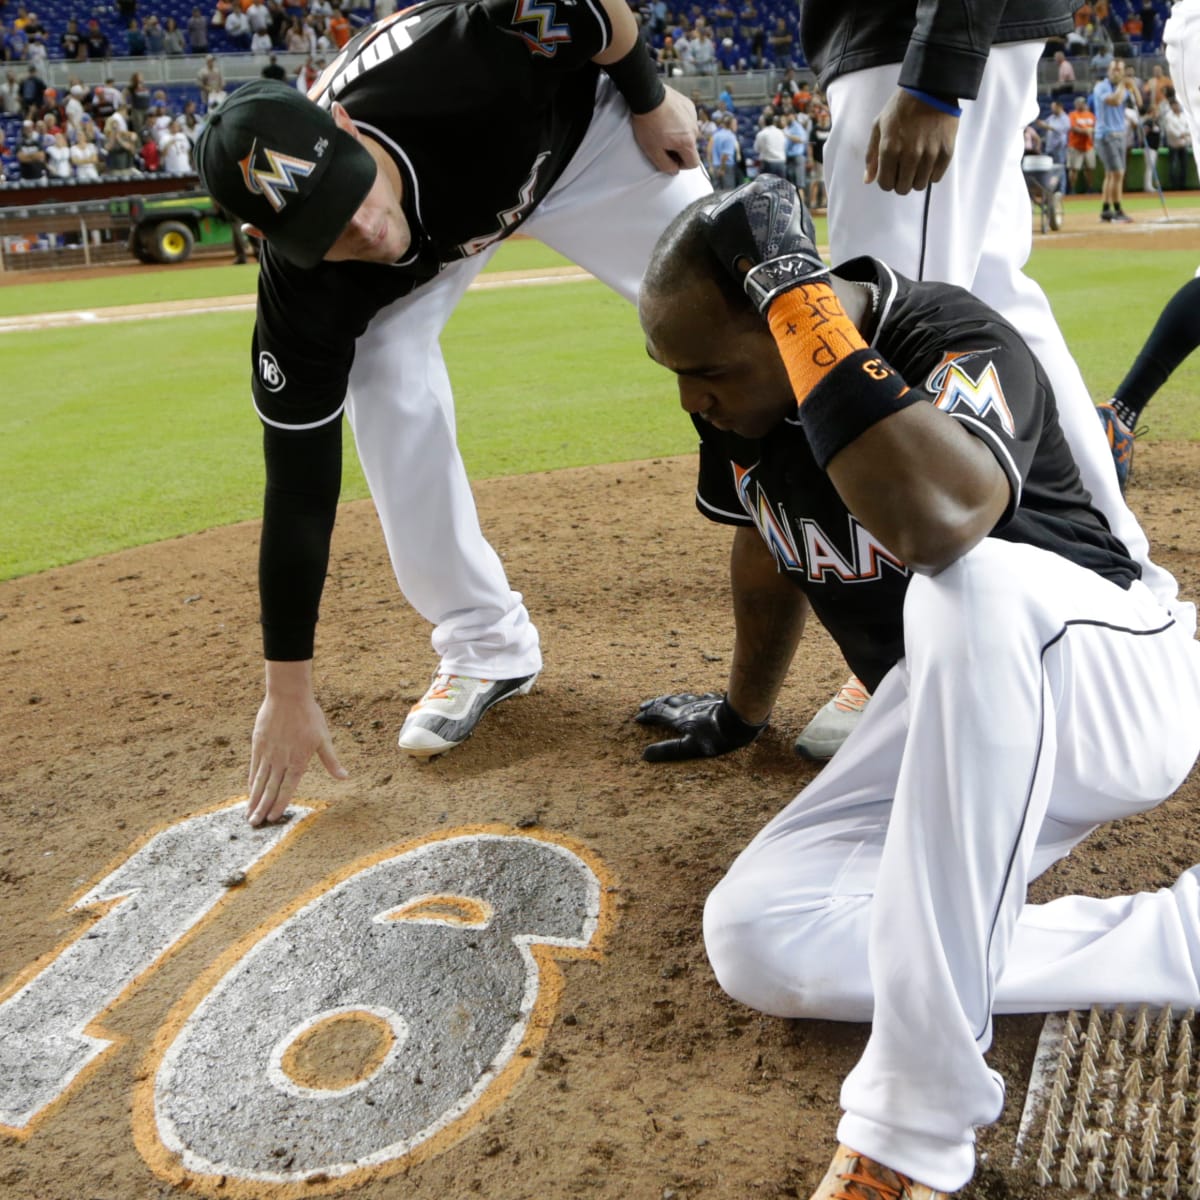 Marlins to retire Jose Fernandez's jersey number - Sports Illustrated